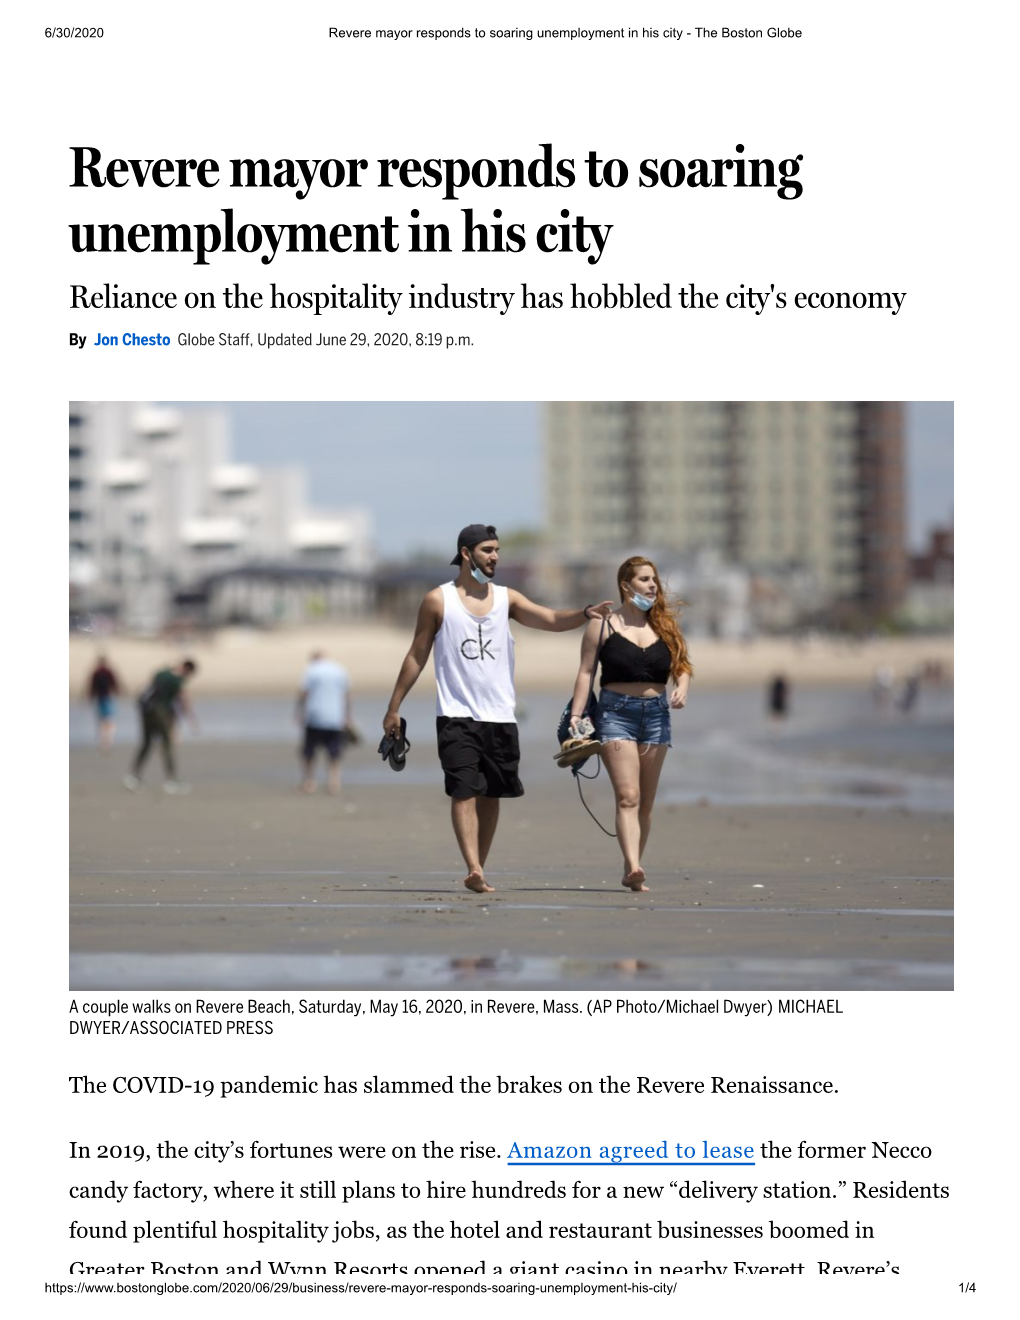 Revere Mayor Responds to Soaring Unemployment in His City - the Boston Globe